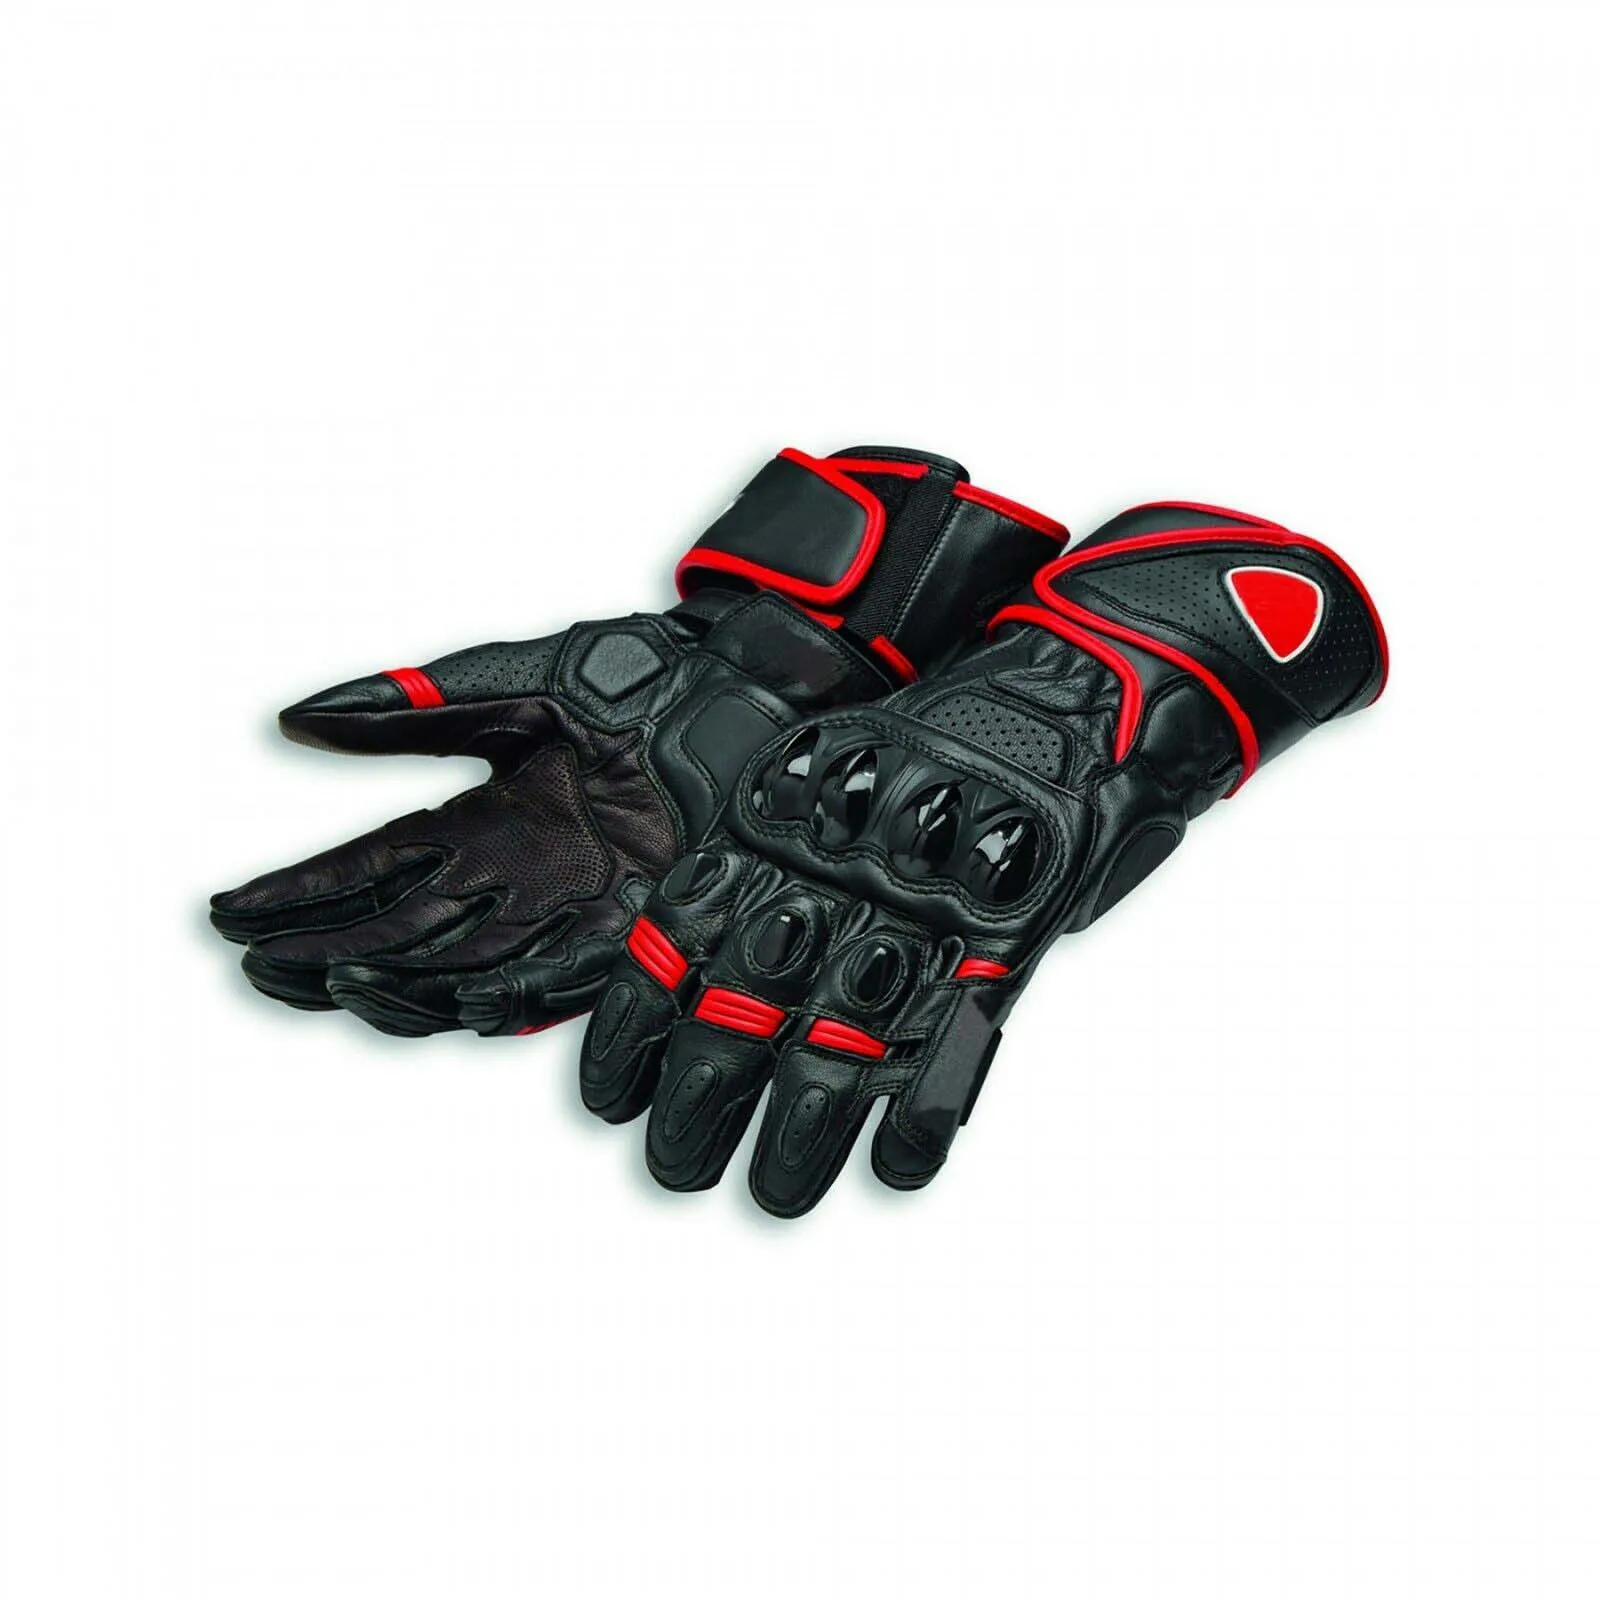 

Moto gp Leather Speed Evo C1 Motorcycle Gloves Racing Gloves Driving For Ducati Team Motorbike Black/Red Gloves